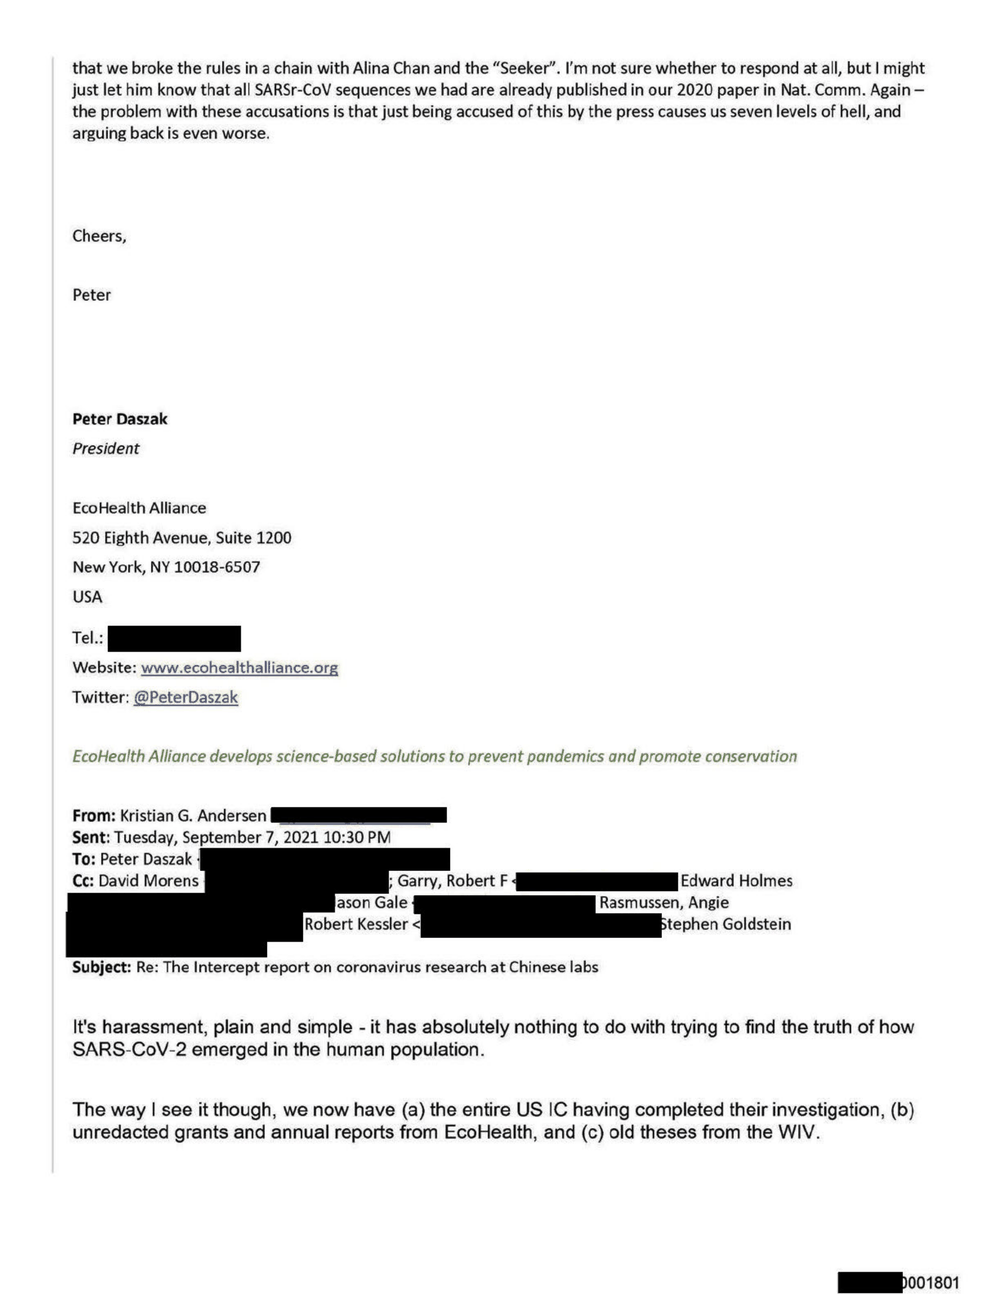 Page 28 from David Morens NIH Emails Redacted